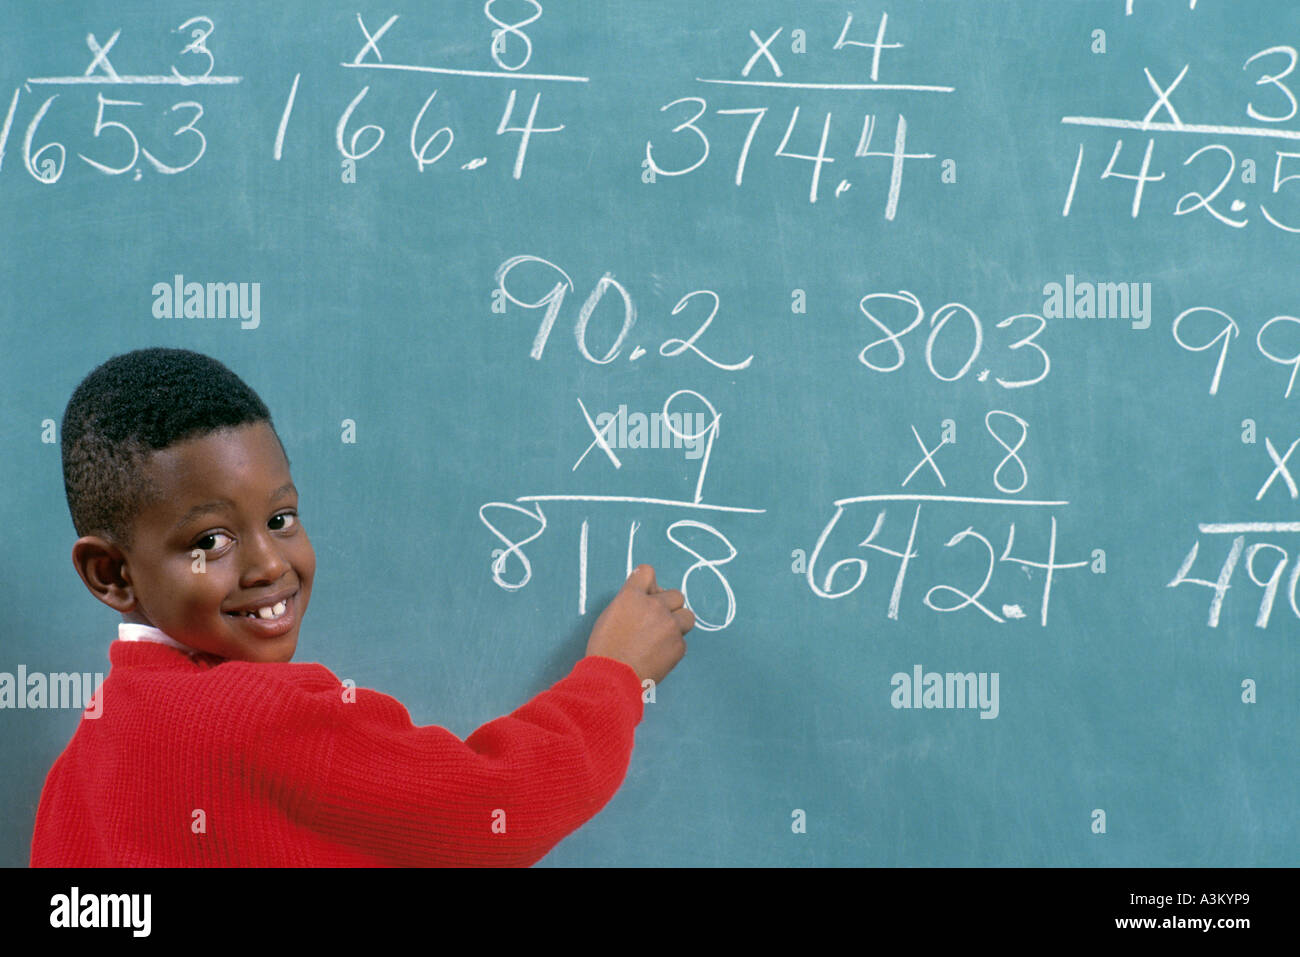 african american male student solving math problems on chalk board A3KYP9